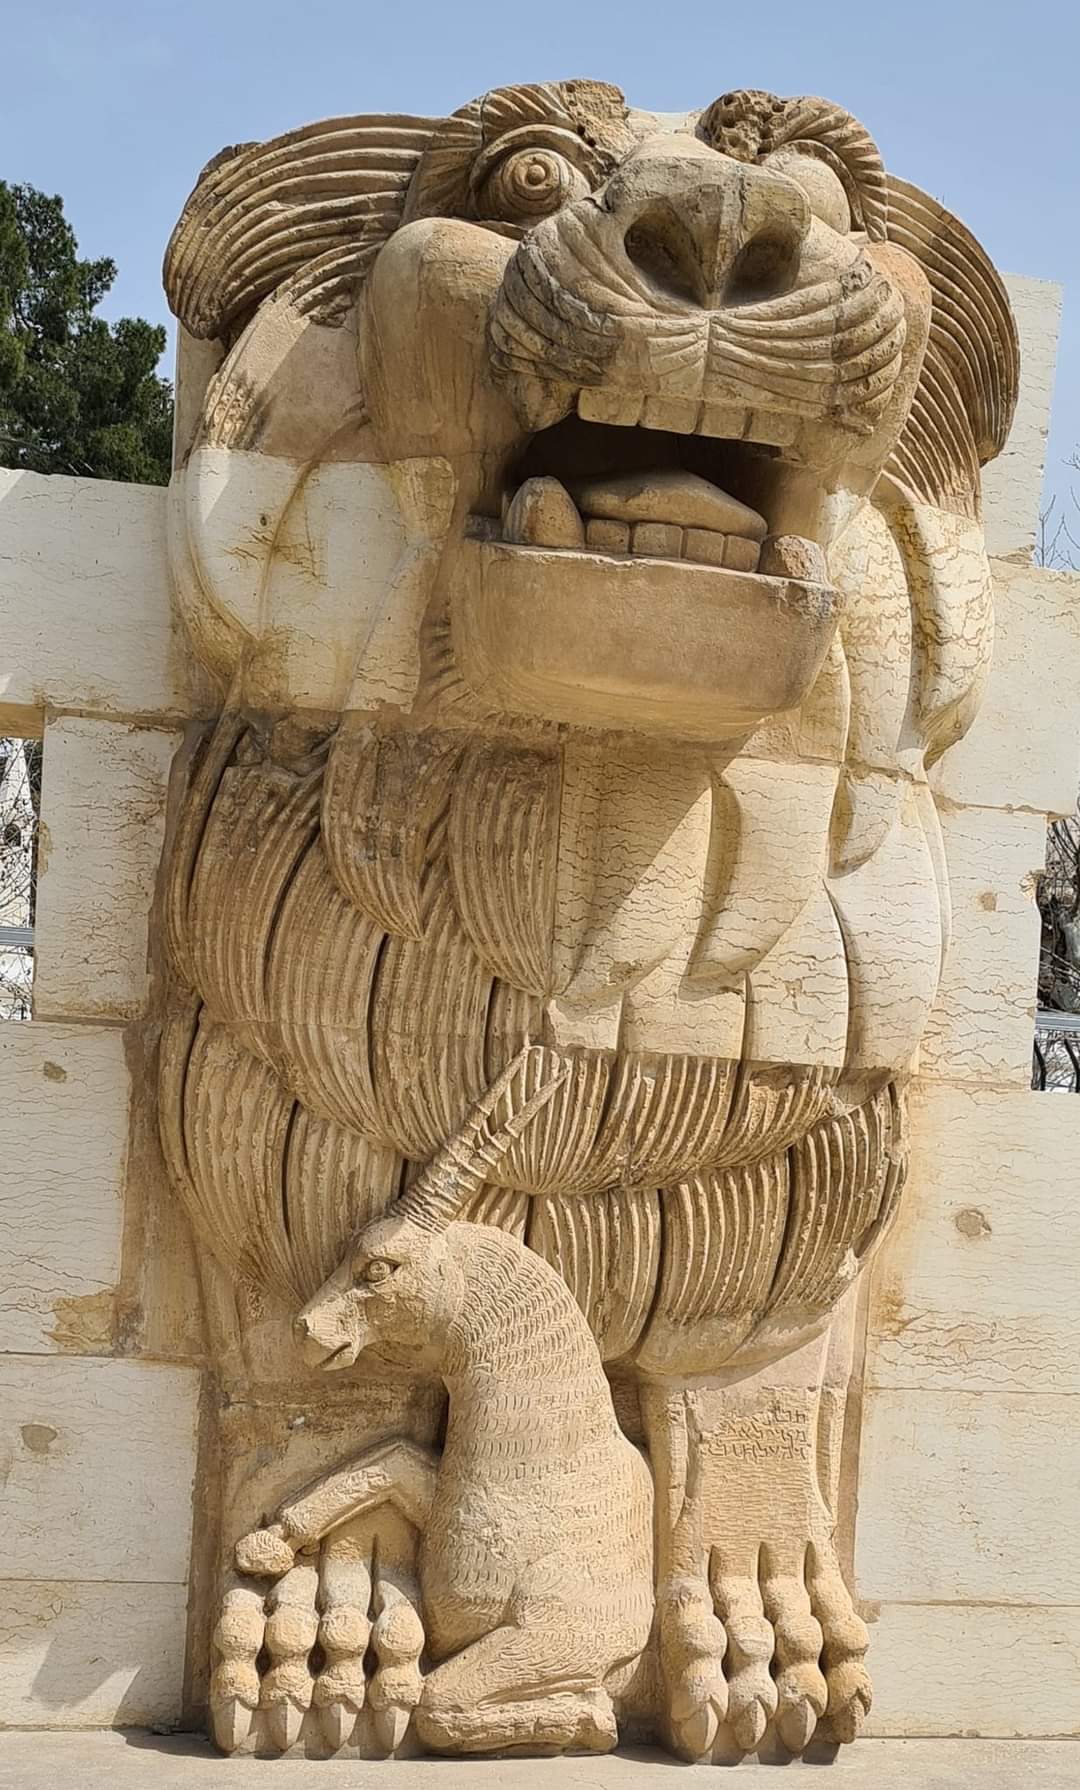 Lion at the National Museum in Damascus, Syria